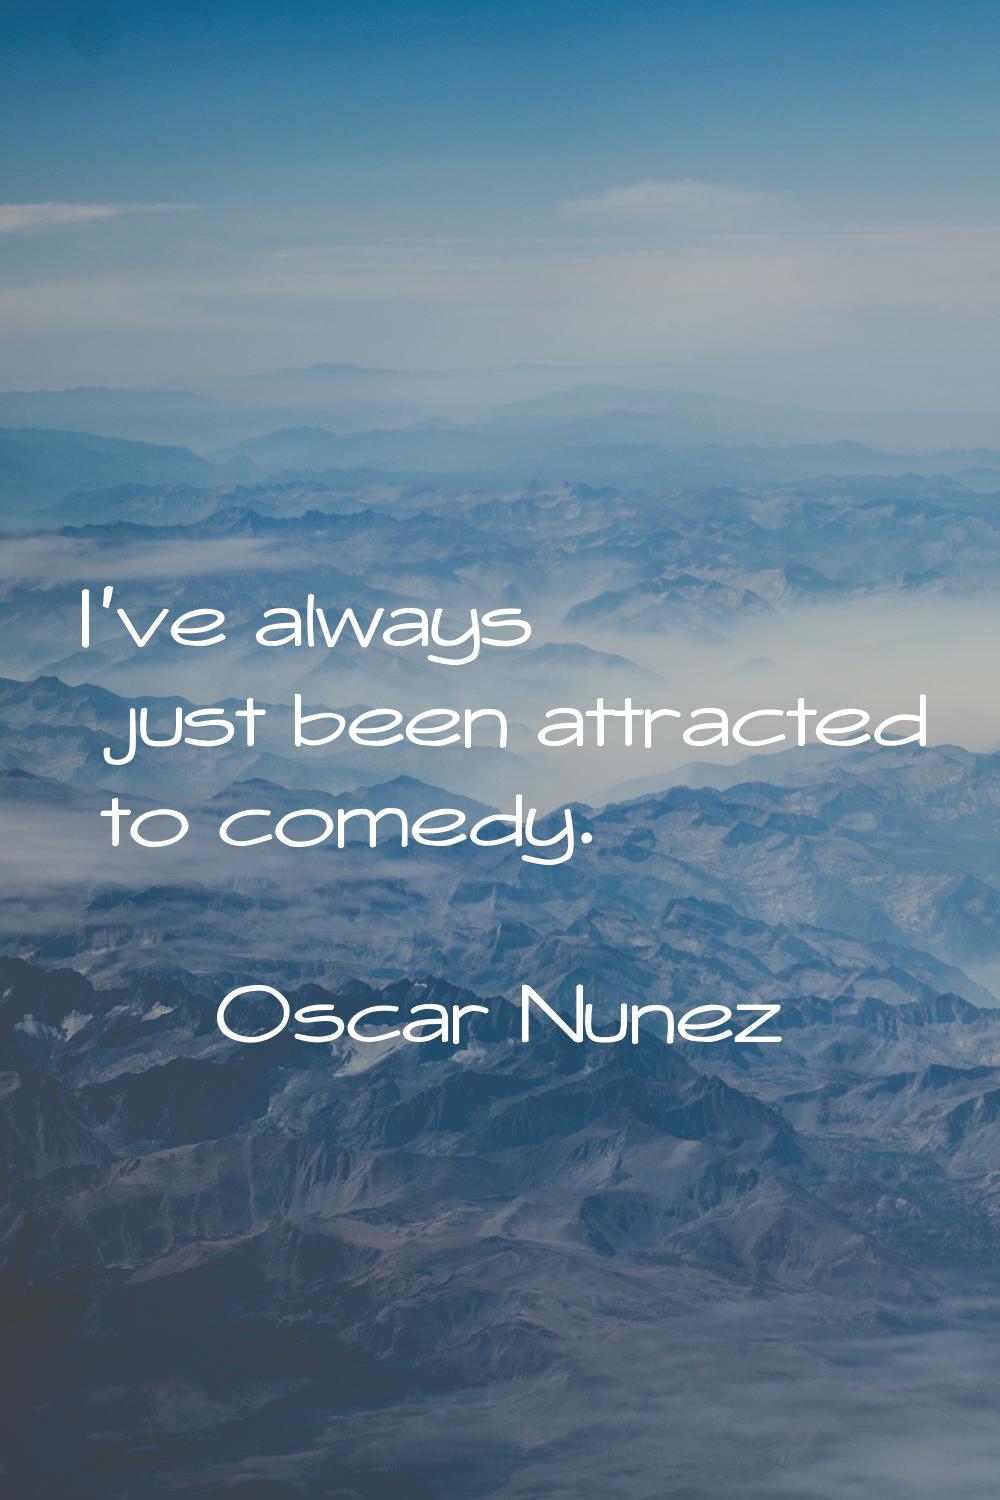 I've always just been attracted to comedy.